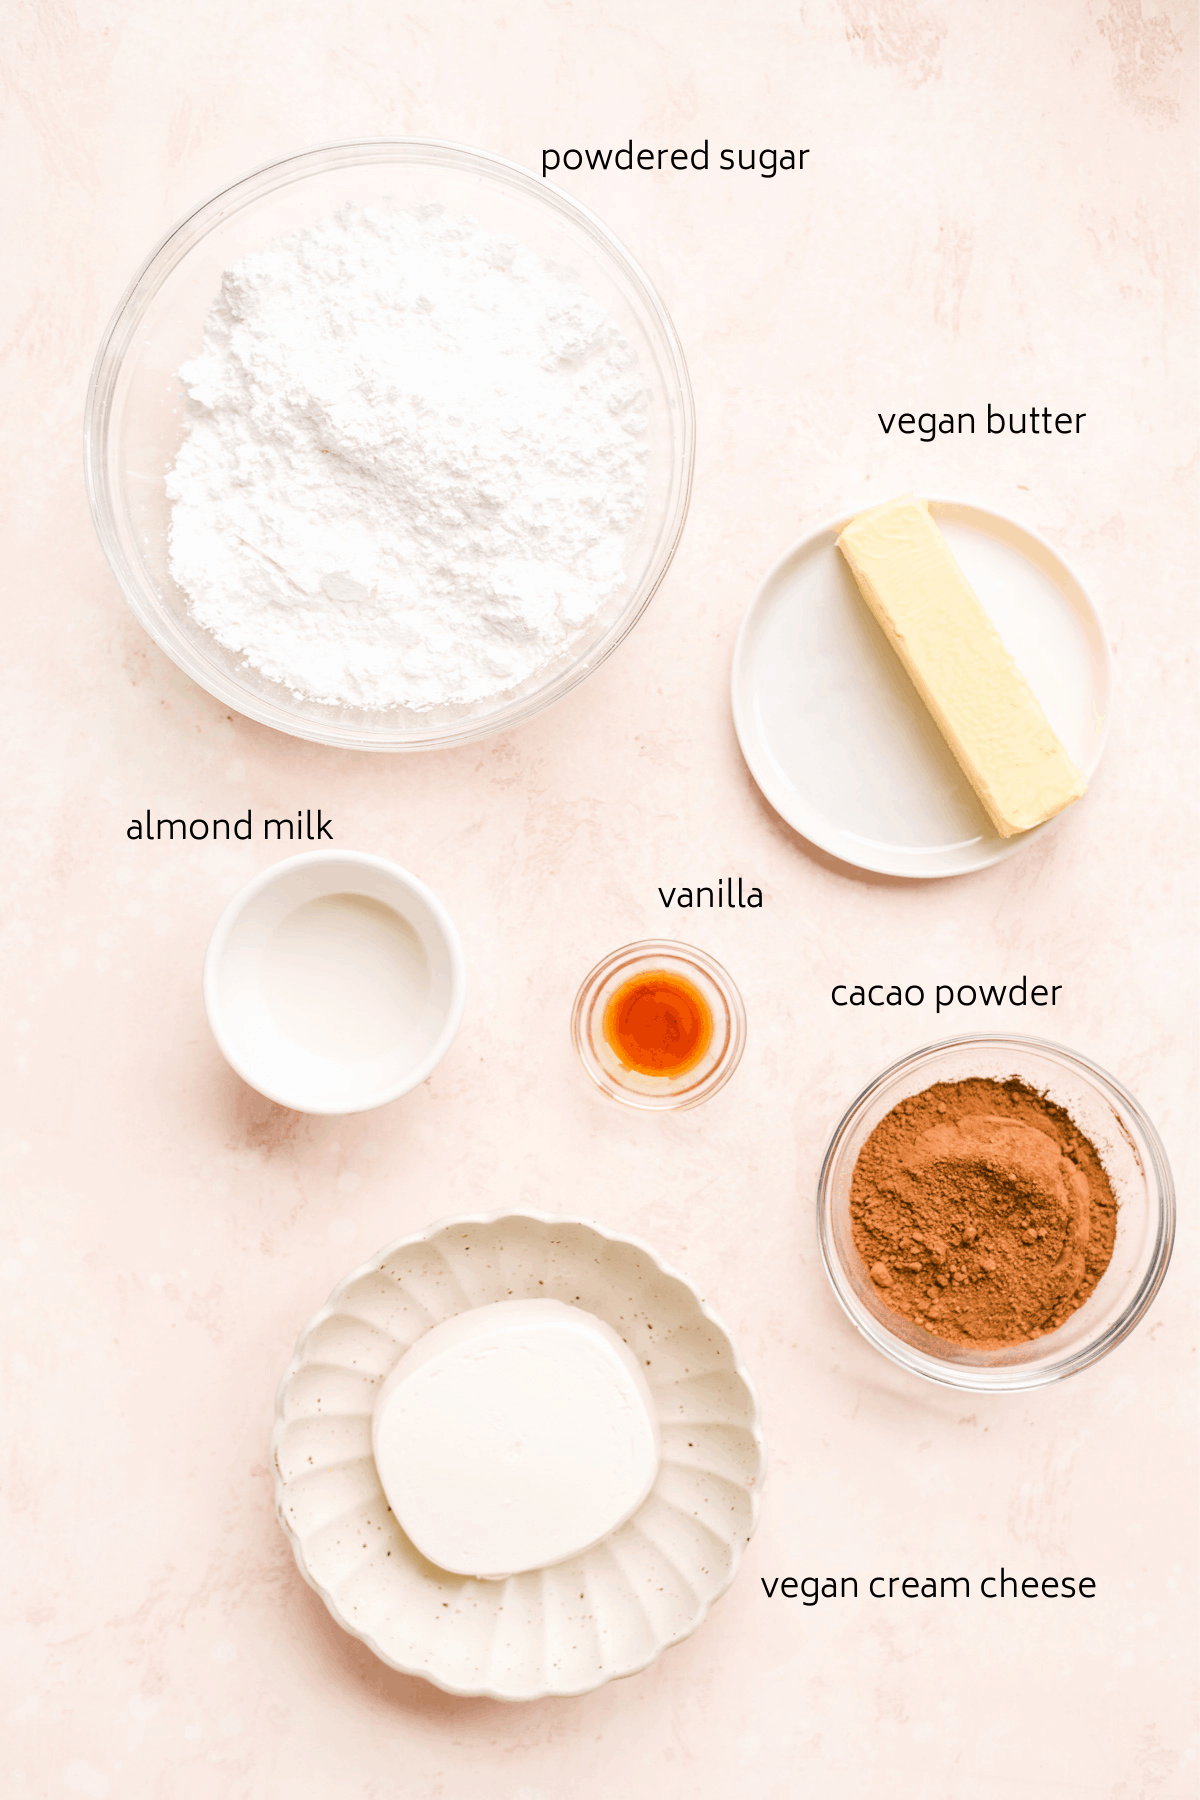 Image of ingredients on surface with labels including powdered sugar, vegan butter, cacao powder, etc.